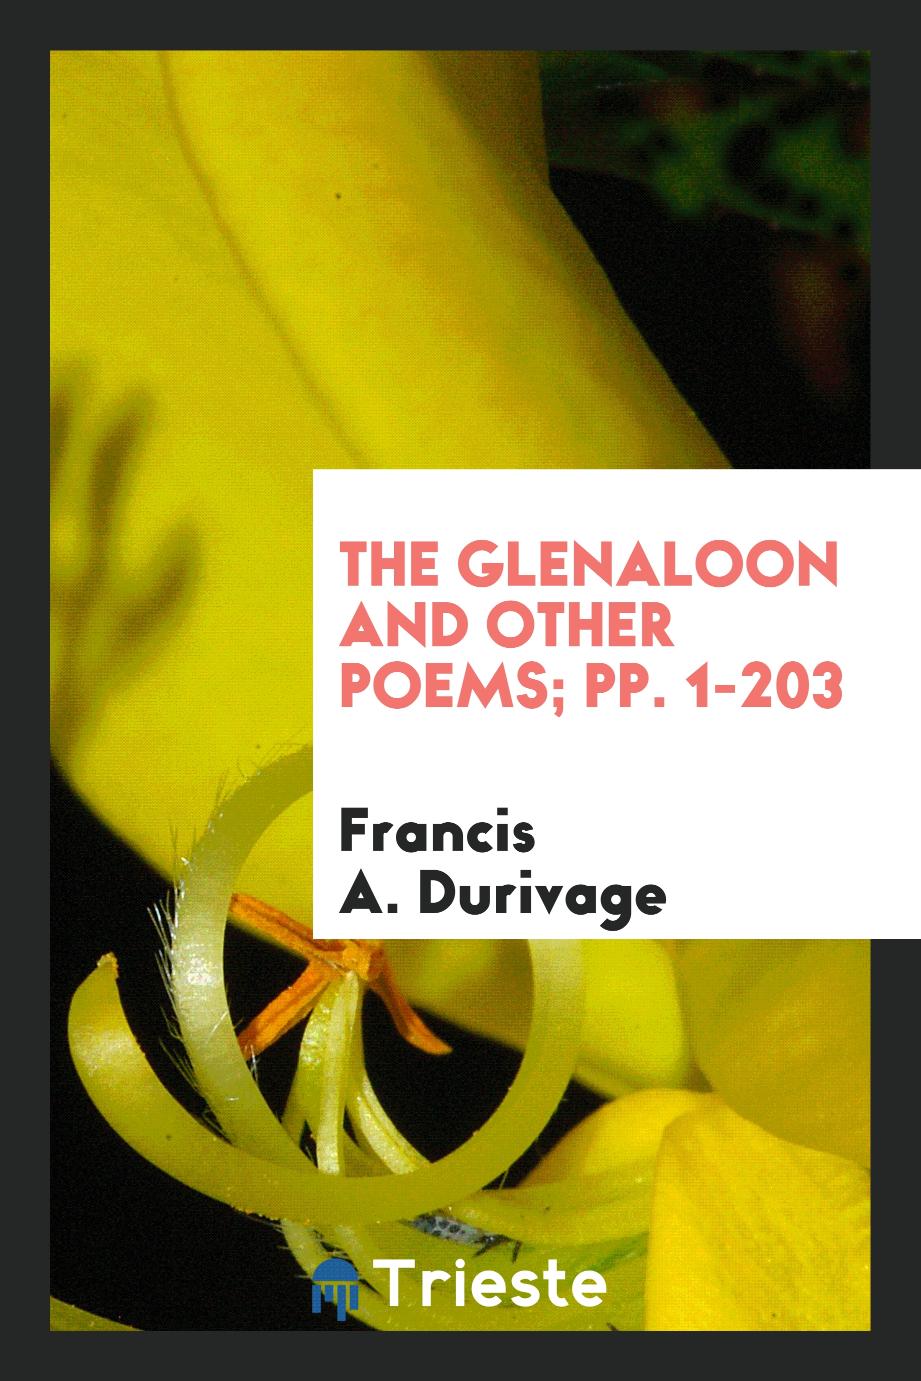 The Glenaloon and Other Poems; pp. 1-203